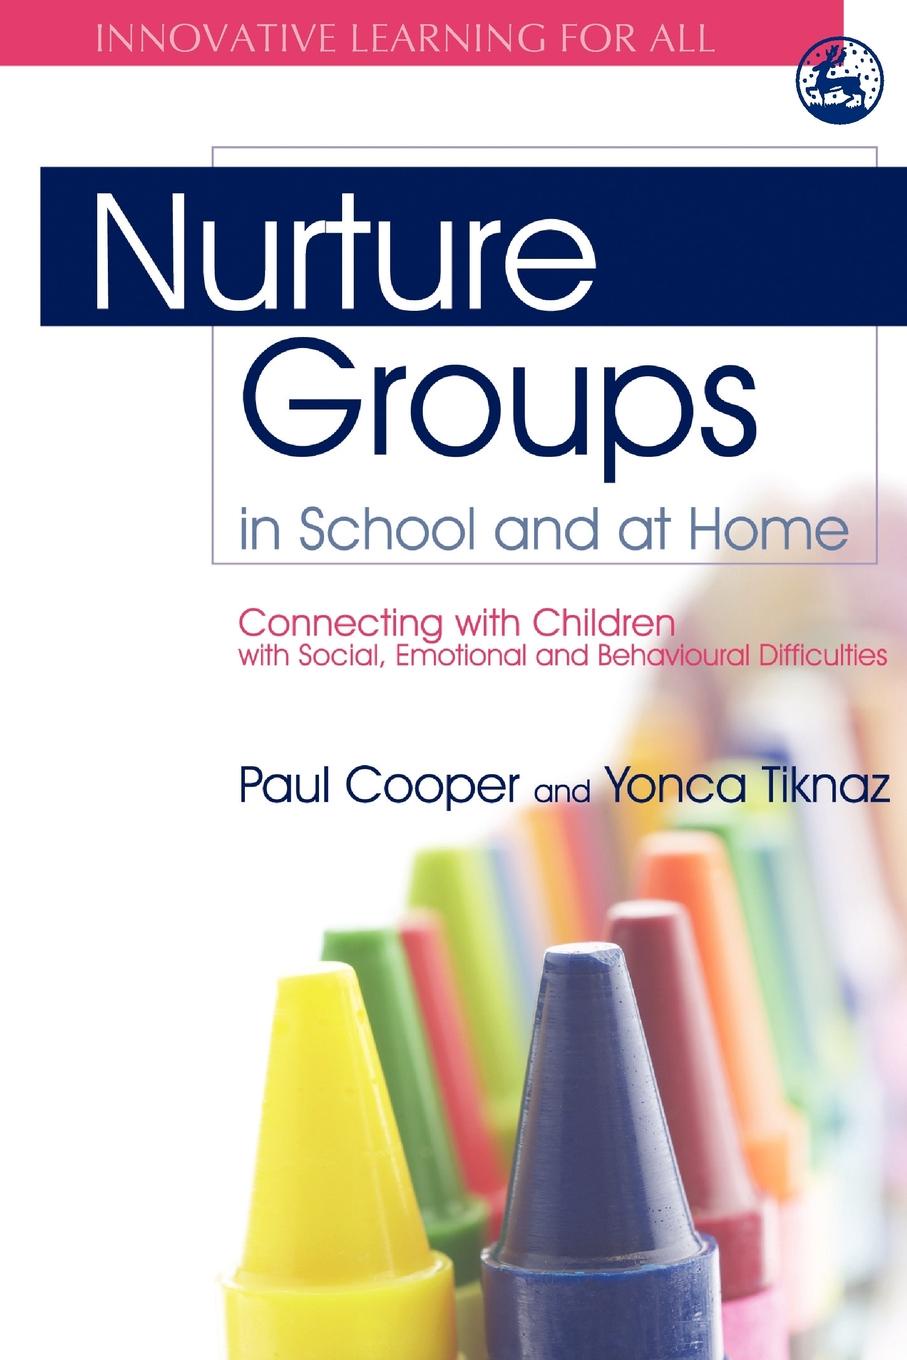 Nurture Groups in School and at Home. Connecting with Children with Social, Emotional and Behavioural Difficulties